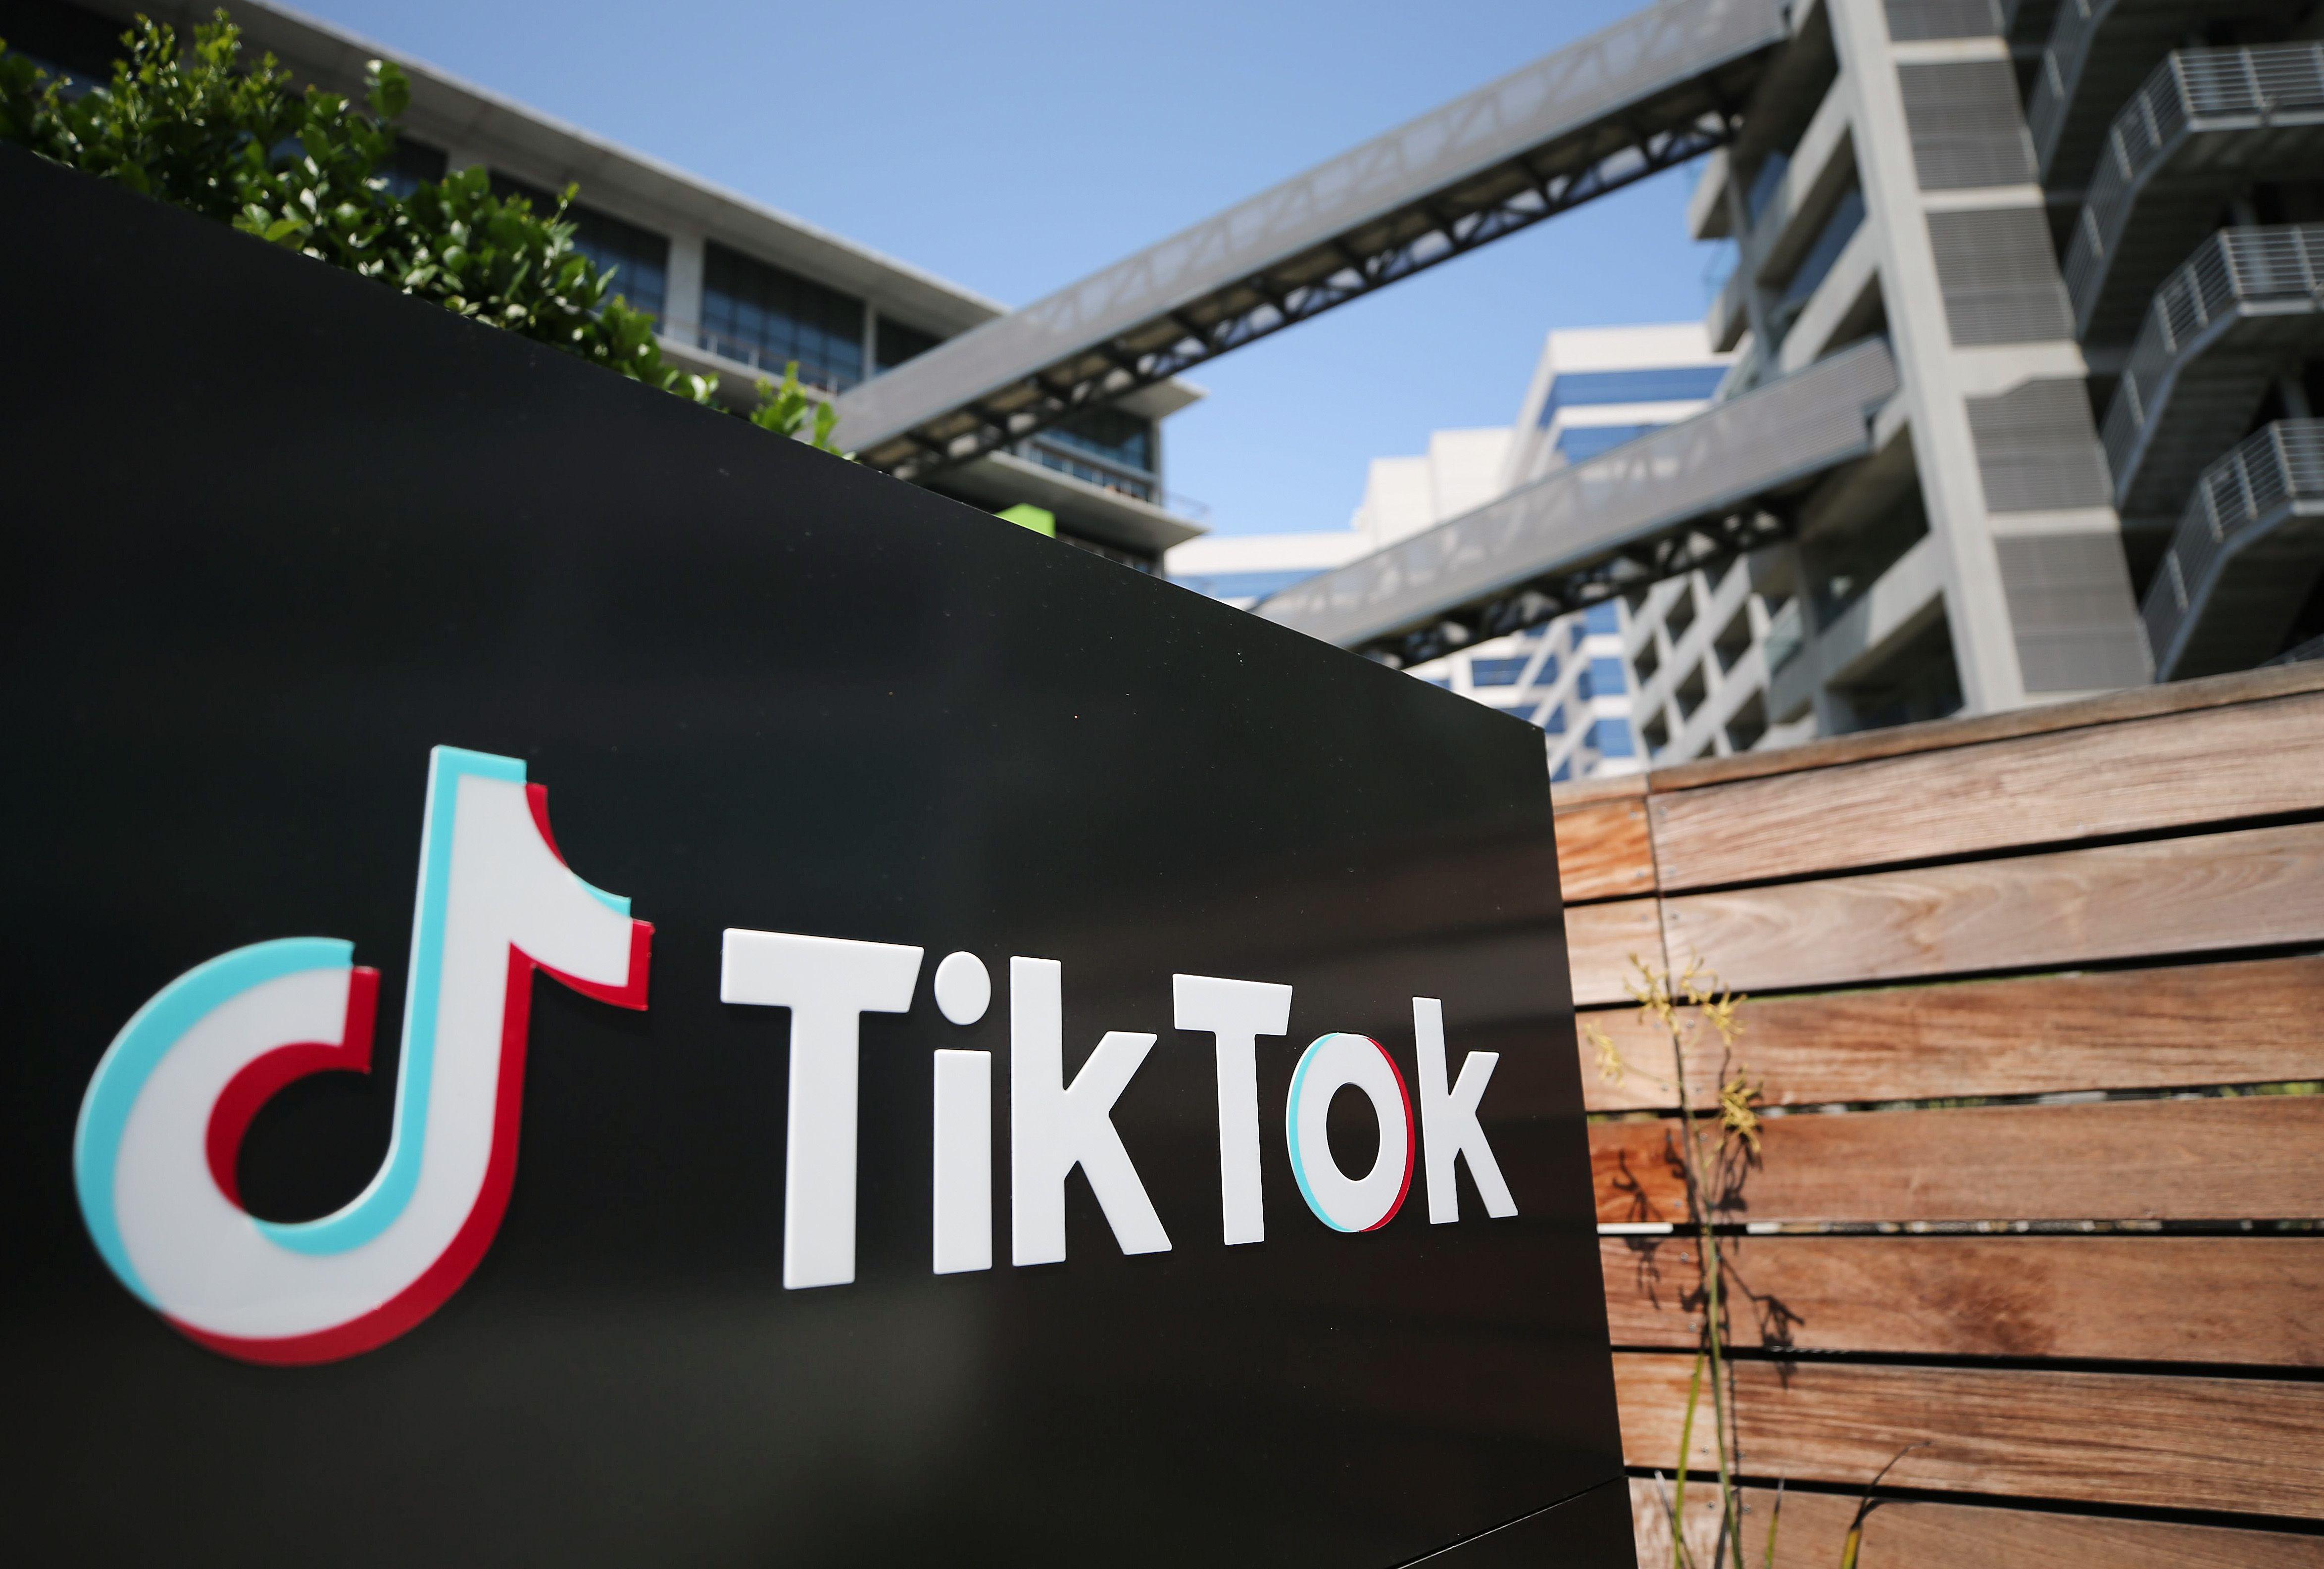 TikTok is owned by Chinese company ByteDance.